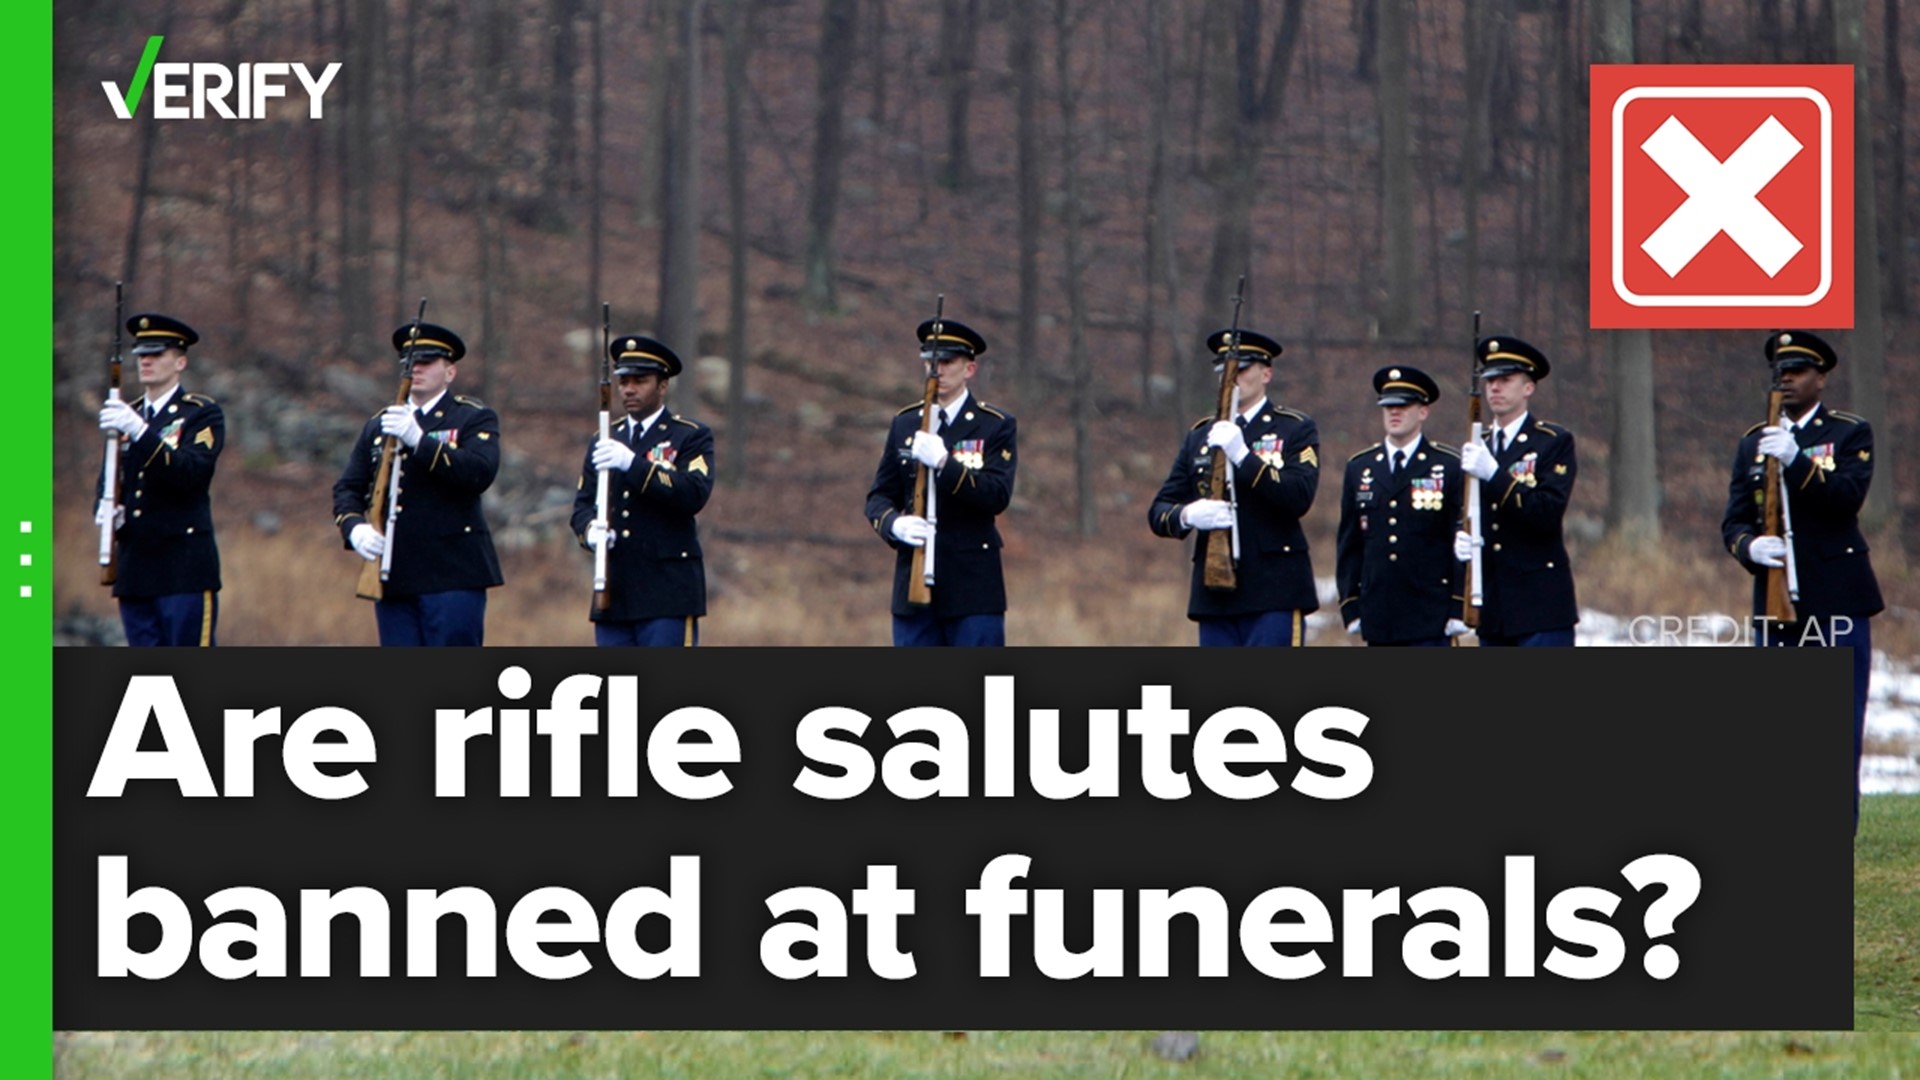 Rifle volleys are no longer a requirement at military funerals, but are still allowed if the personnel is available.